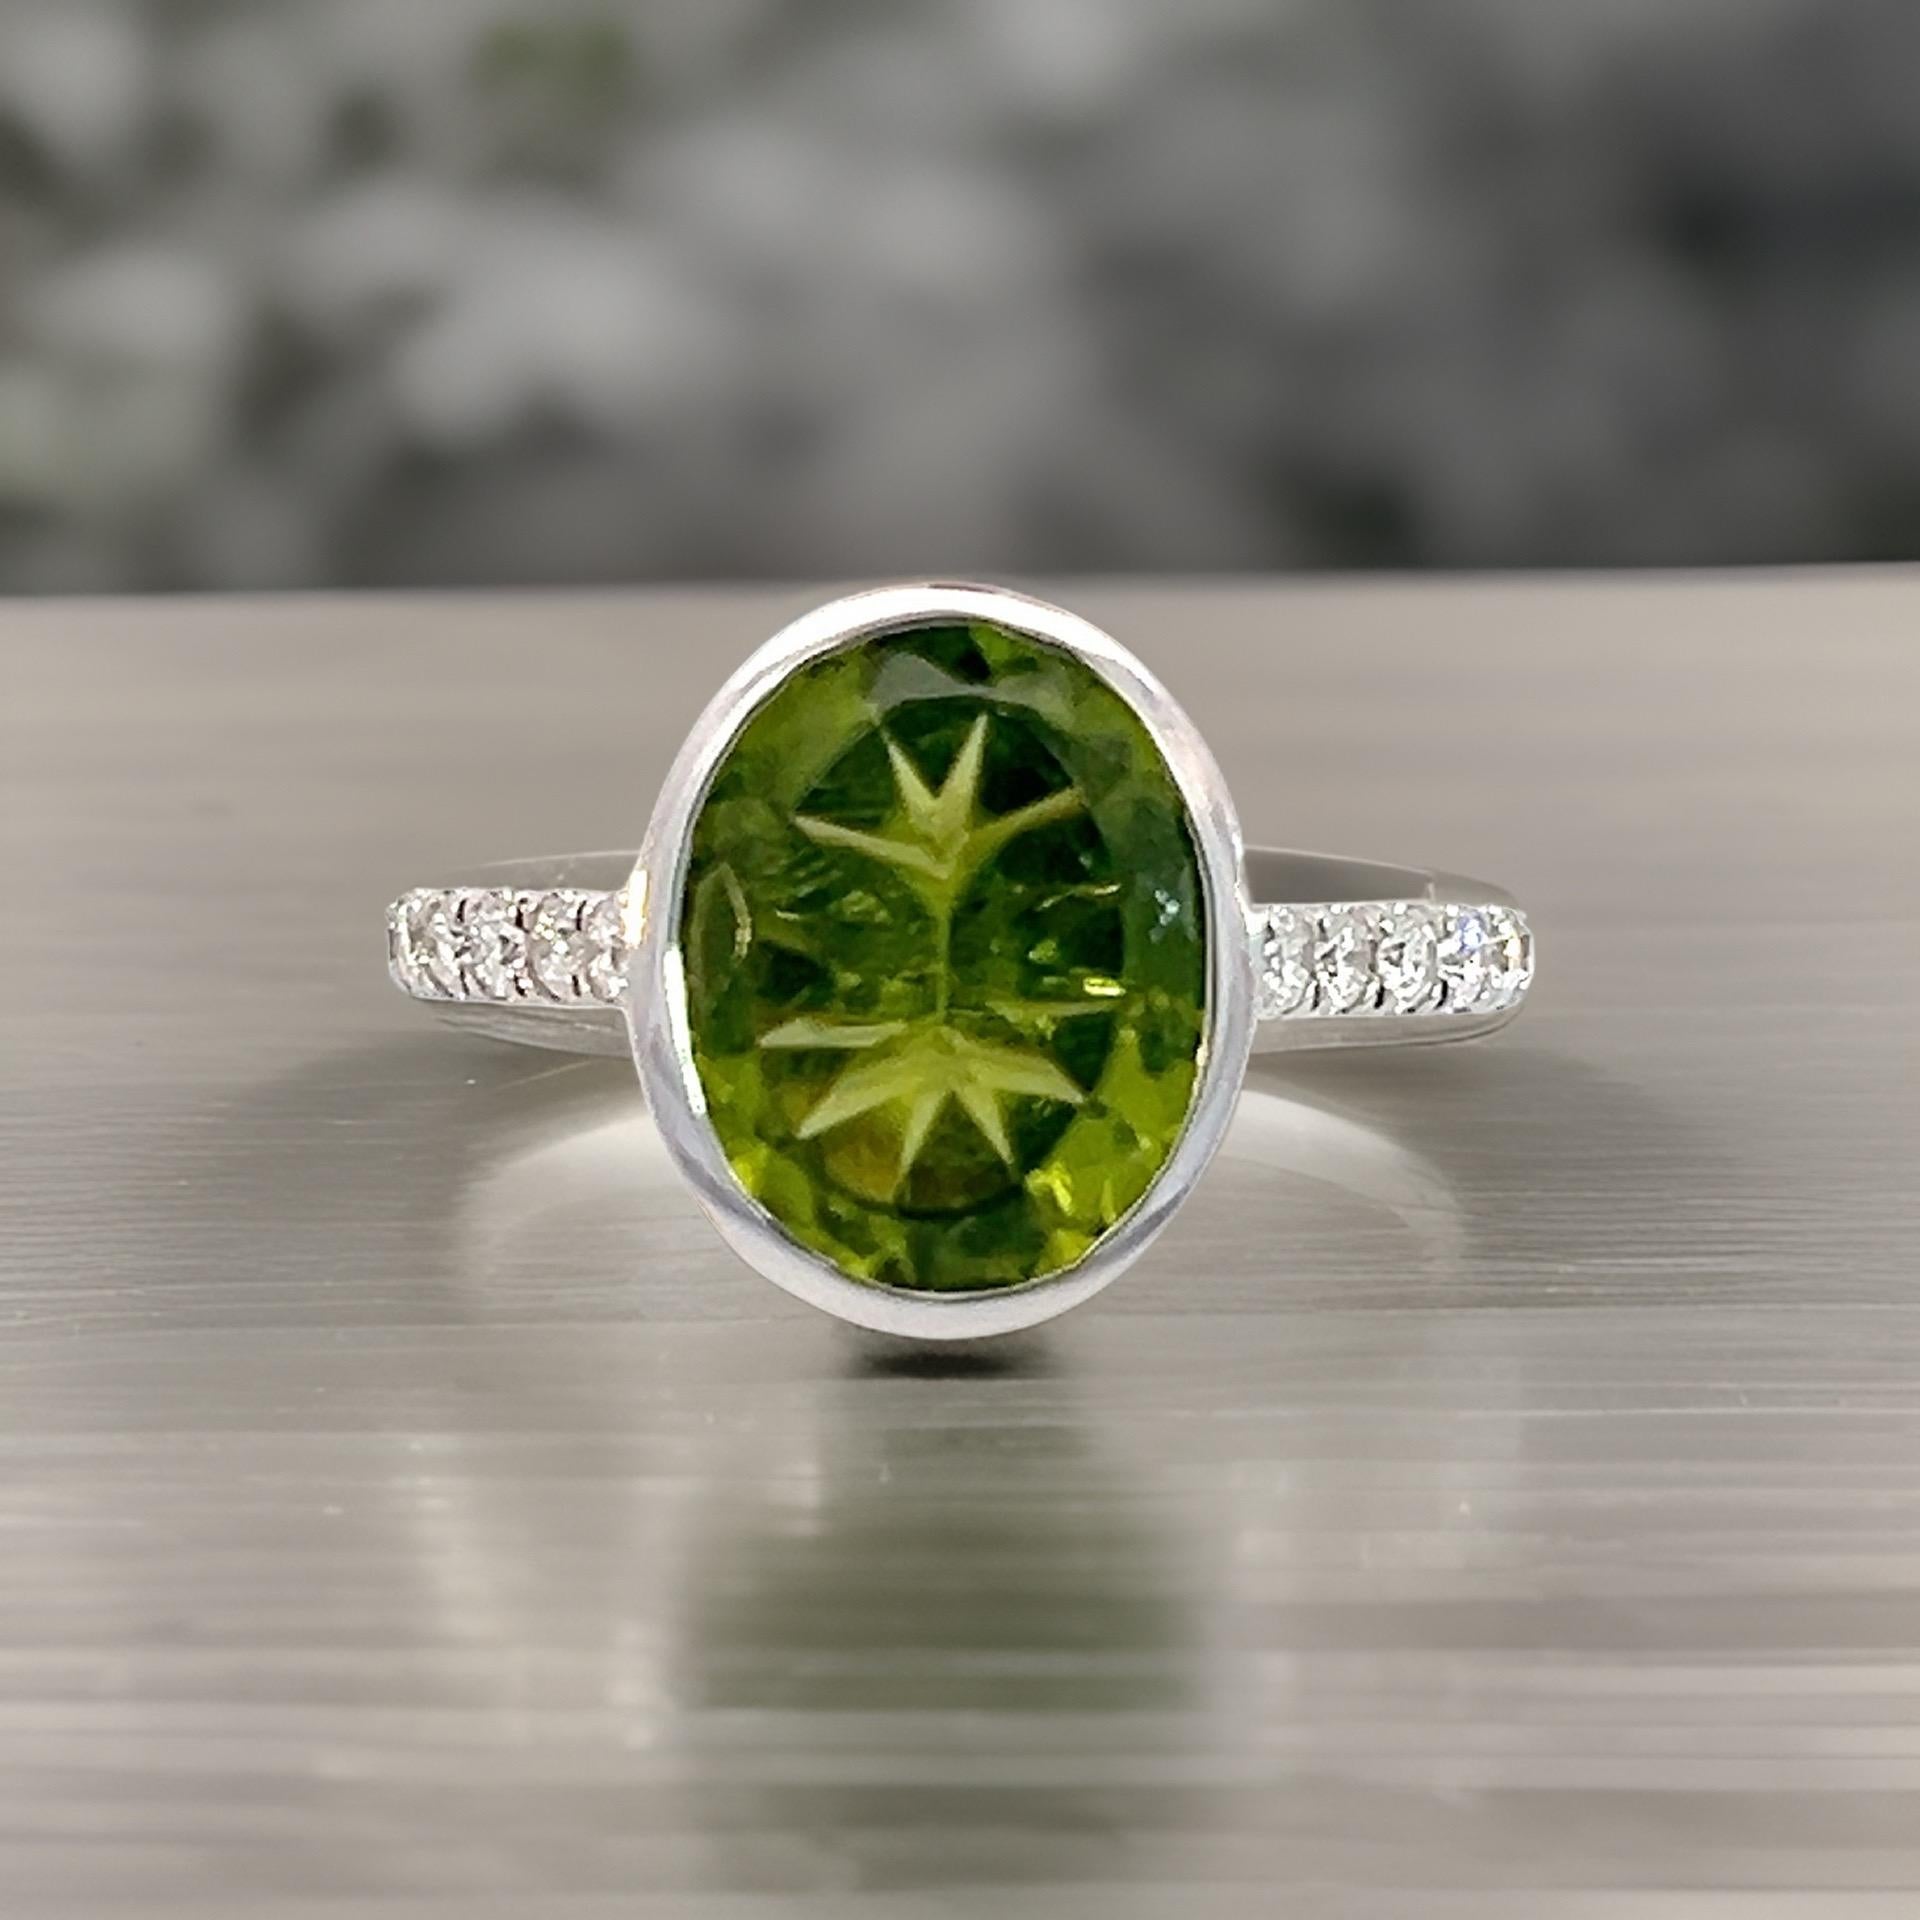 Natural Peridot Diamond Ring 6.5 14k W Gold 3.49 TCW Certified For Sale 2